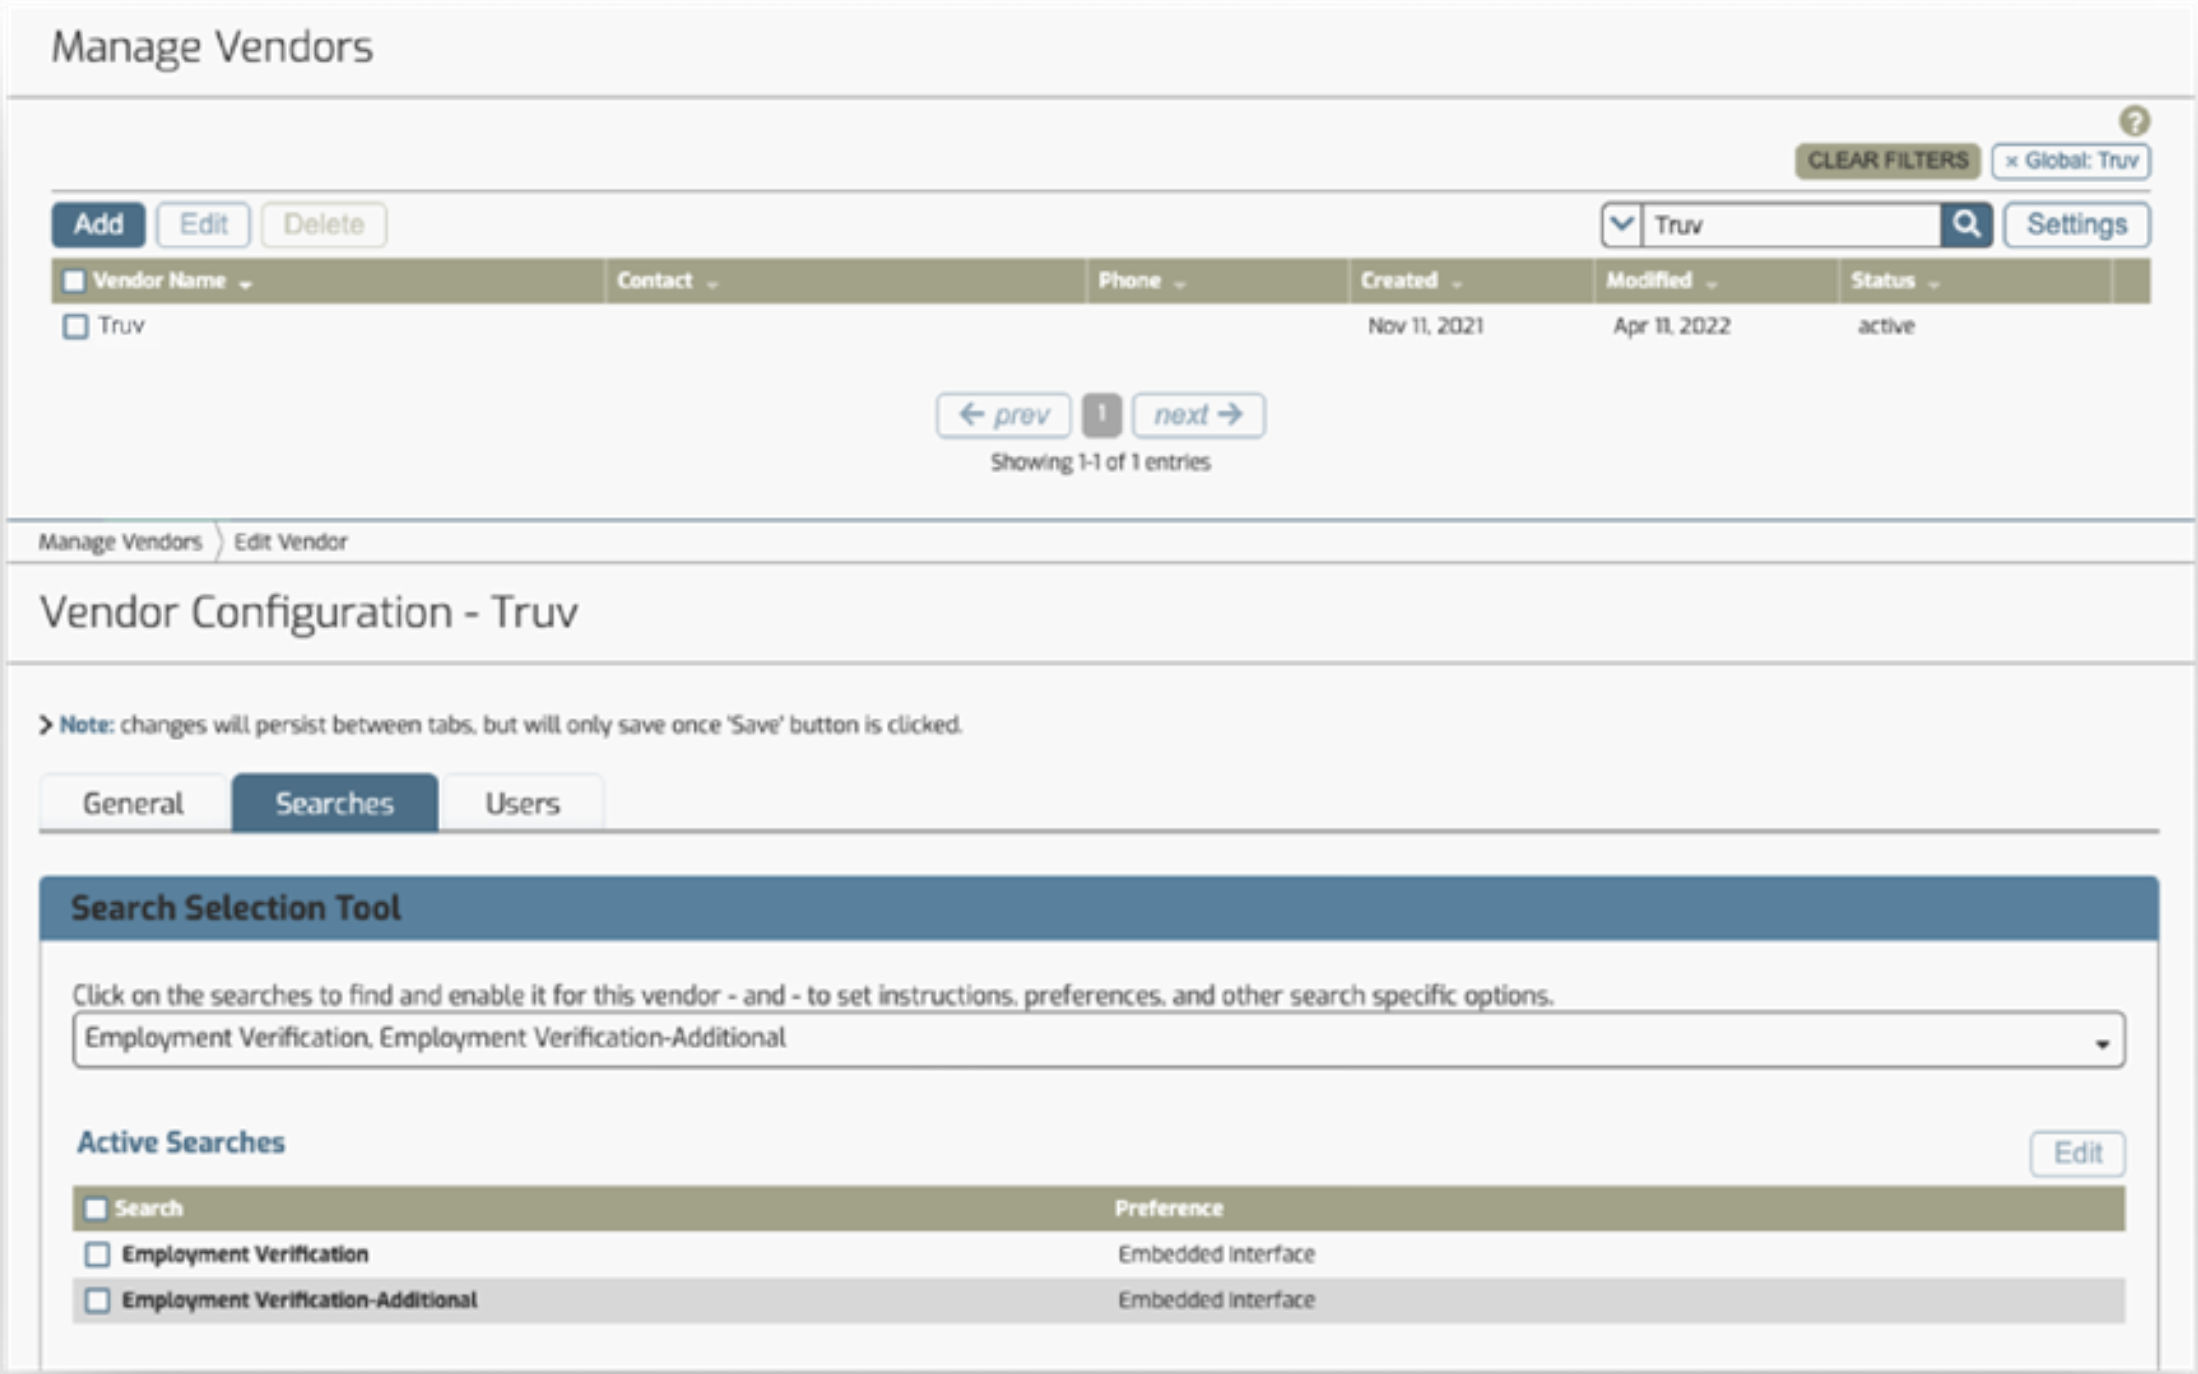 Manage vendor tab with search selection tool using embedded interface preferences.